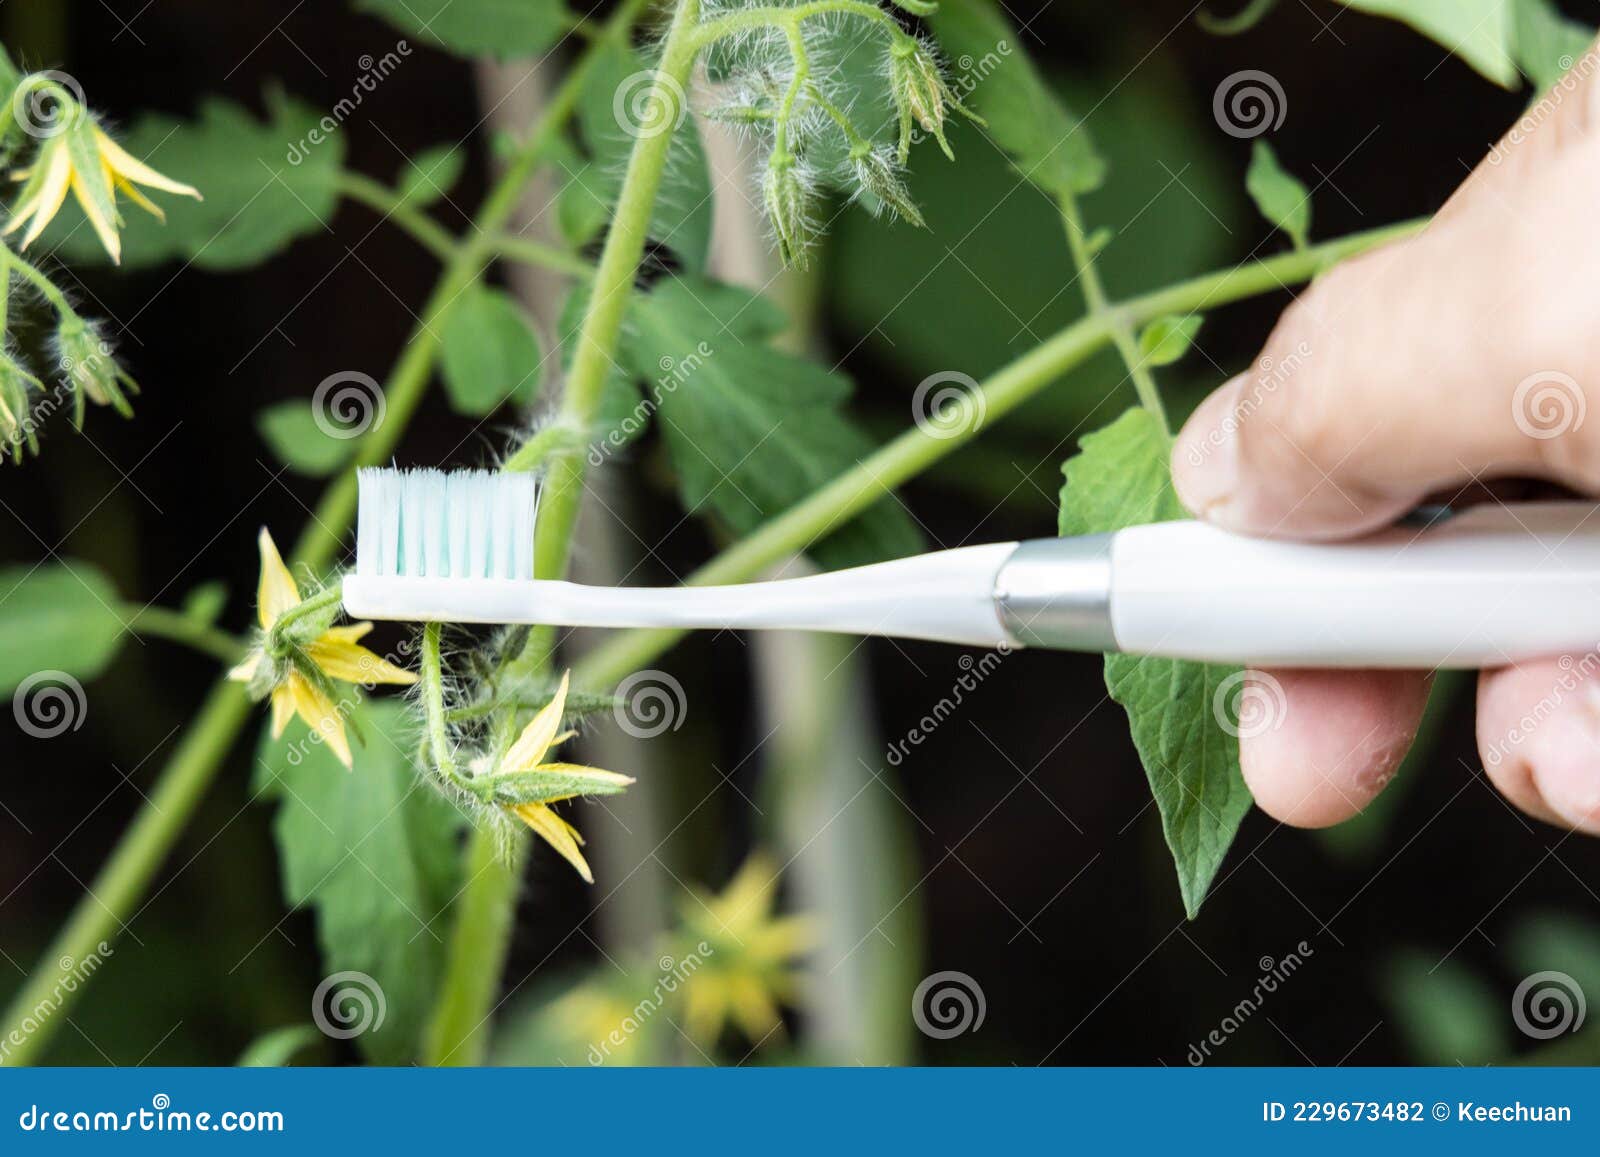 Hand Holding Electric Vibrating Toothbrush Attempt To Manually Hand Pollinate Tomato Plant